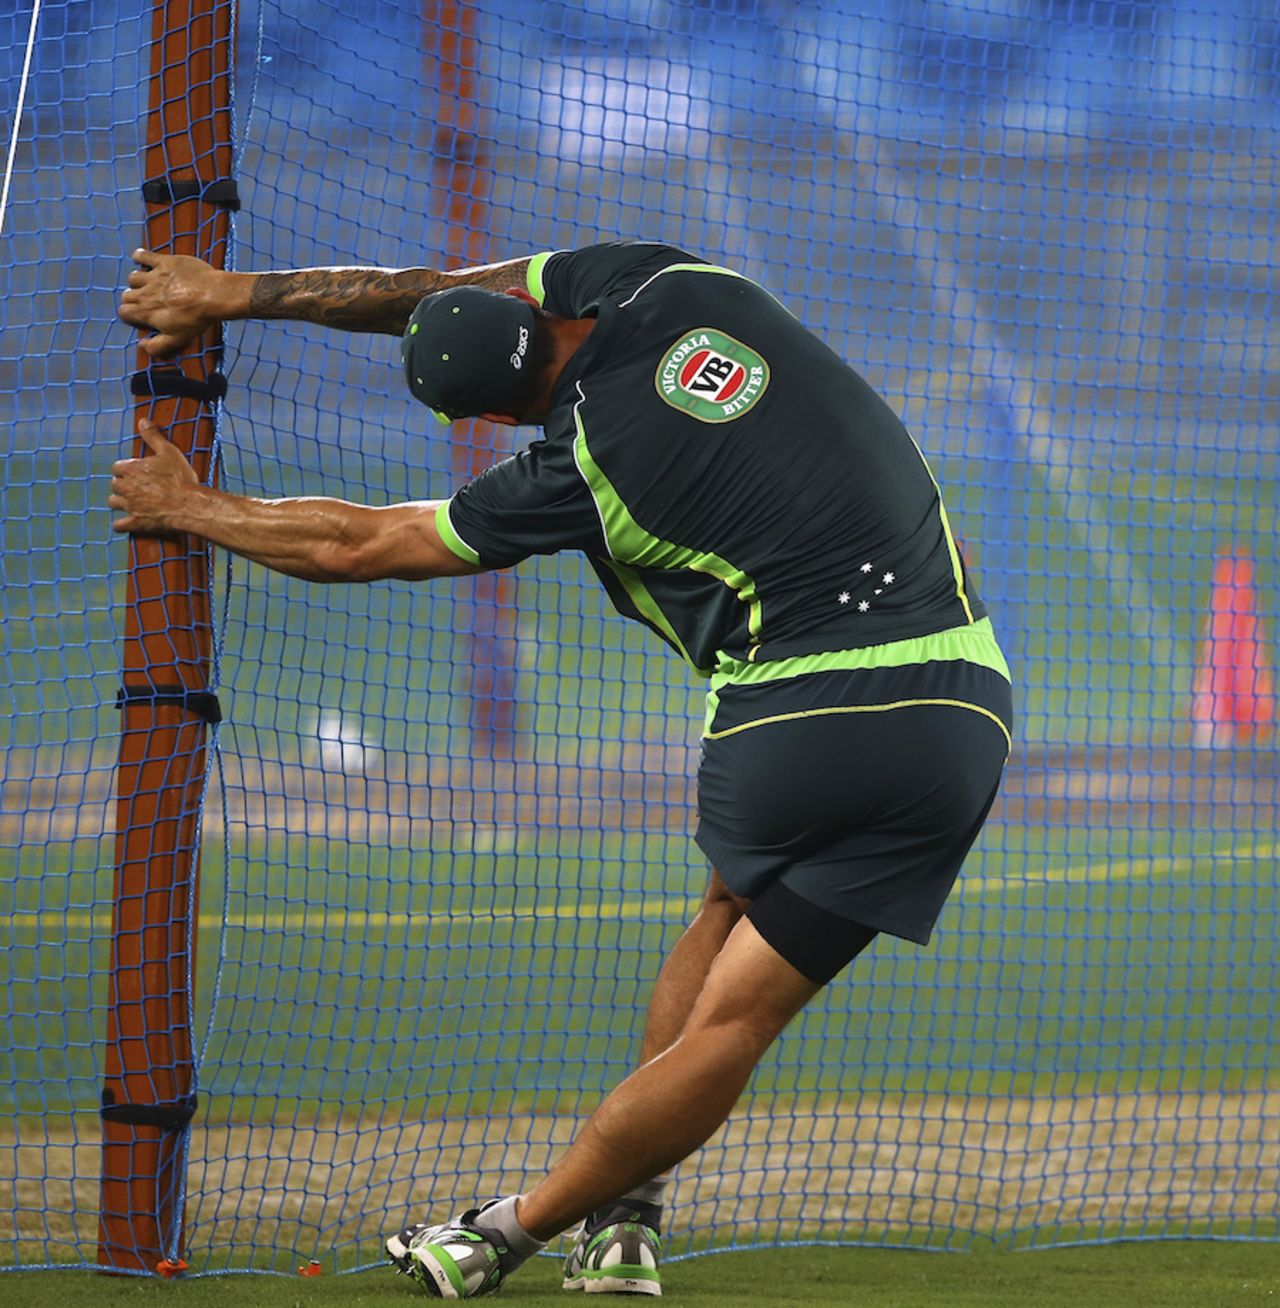 Mitchell Johnson stretches during a net session, Dubai, October 4, 2014